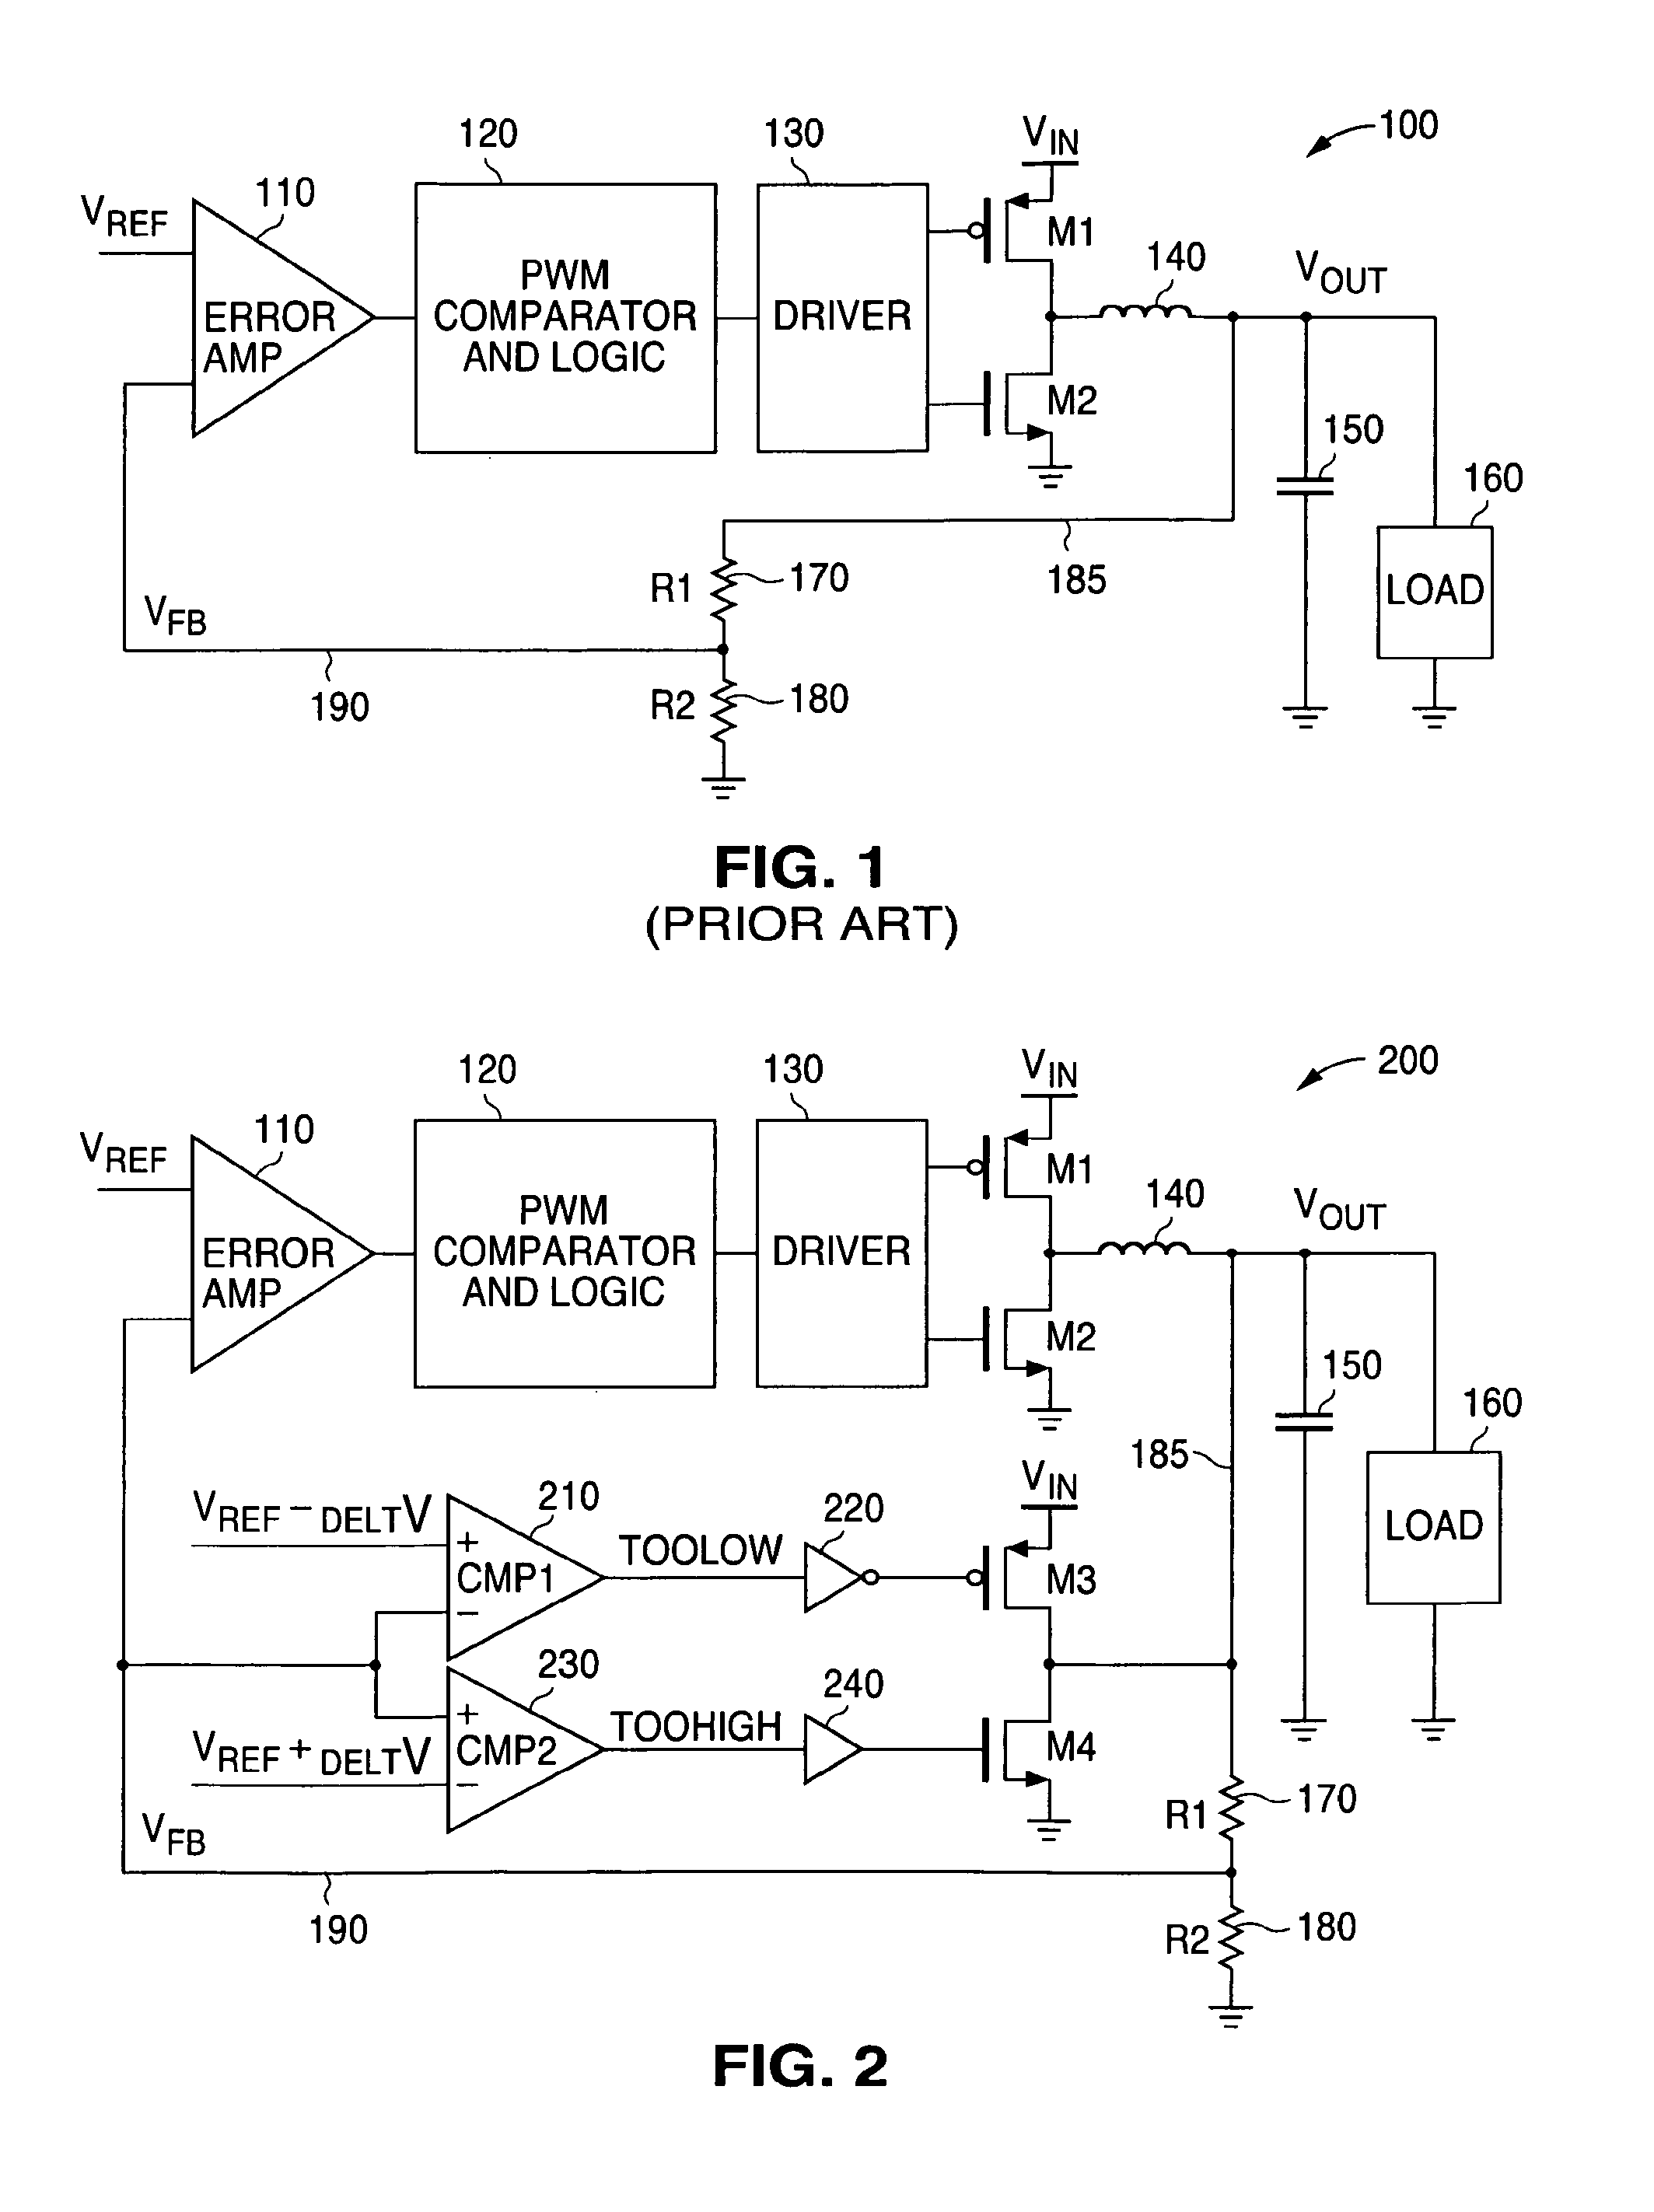 System and method for controlling overshoot and undershoot in a switching regulator